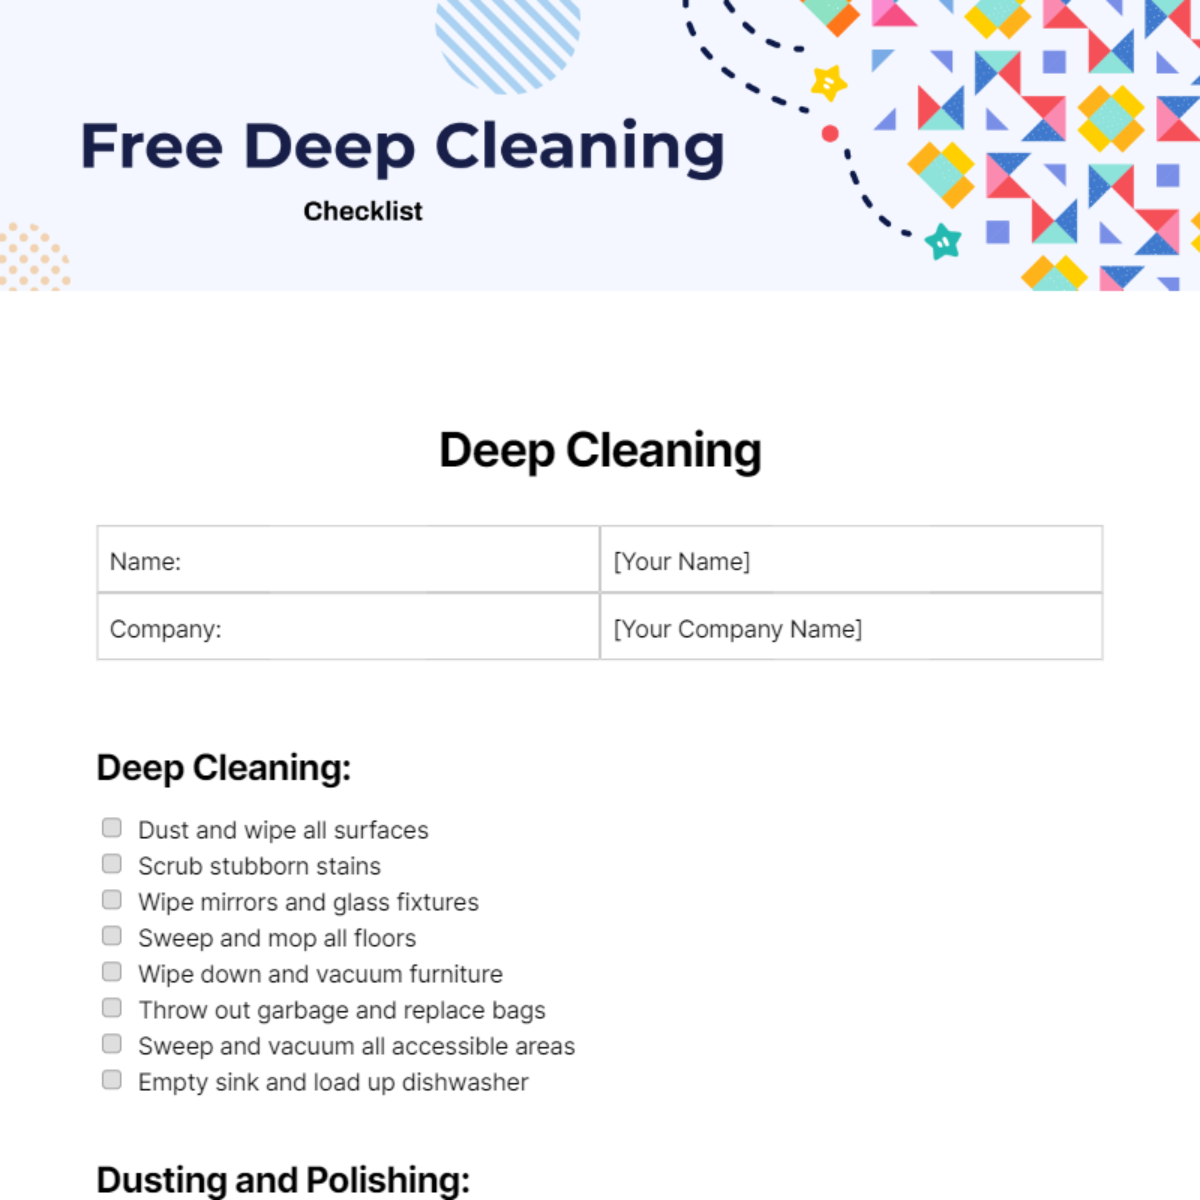 Free Deep Cleaning Checklist Template